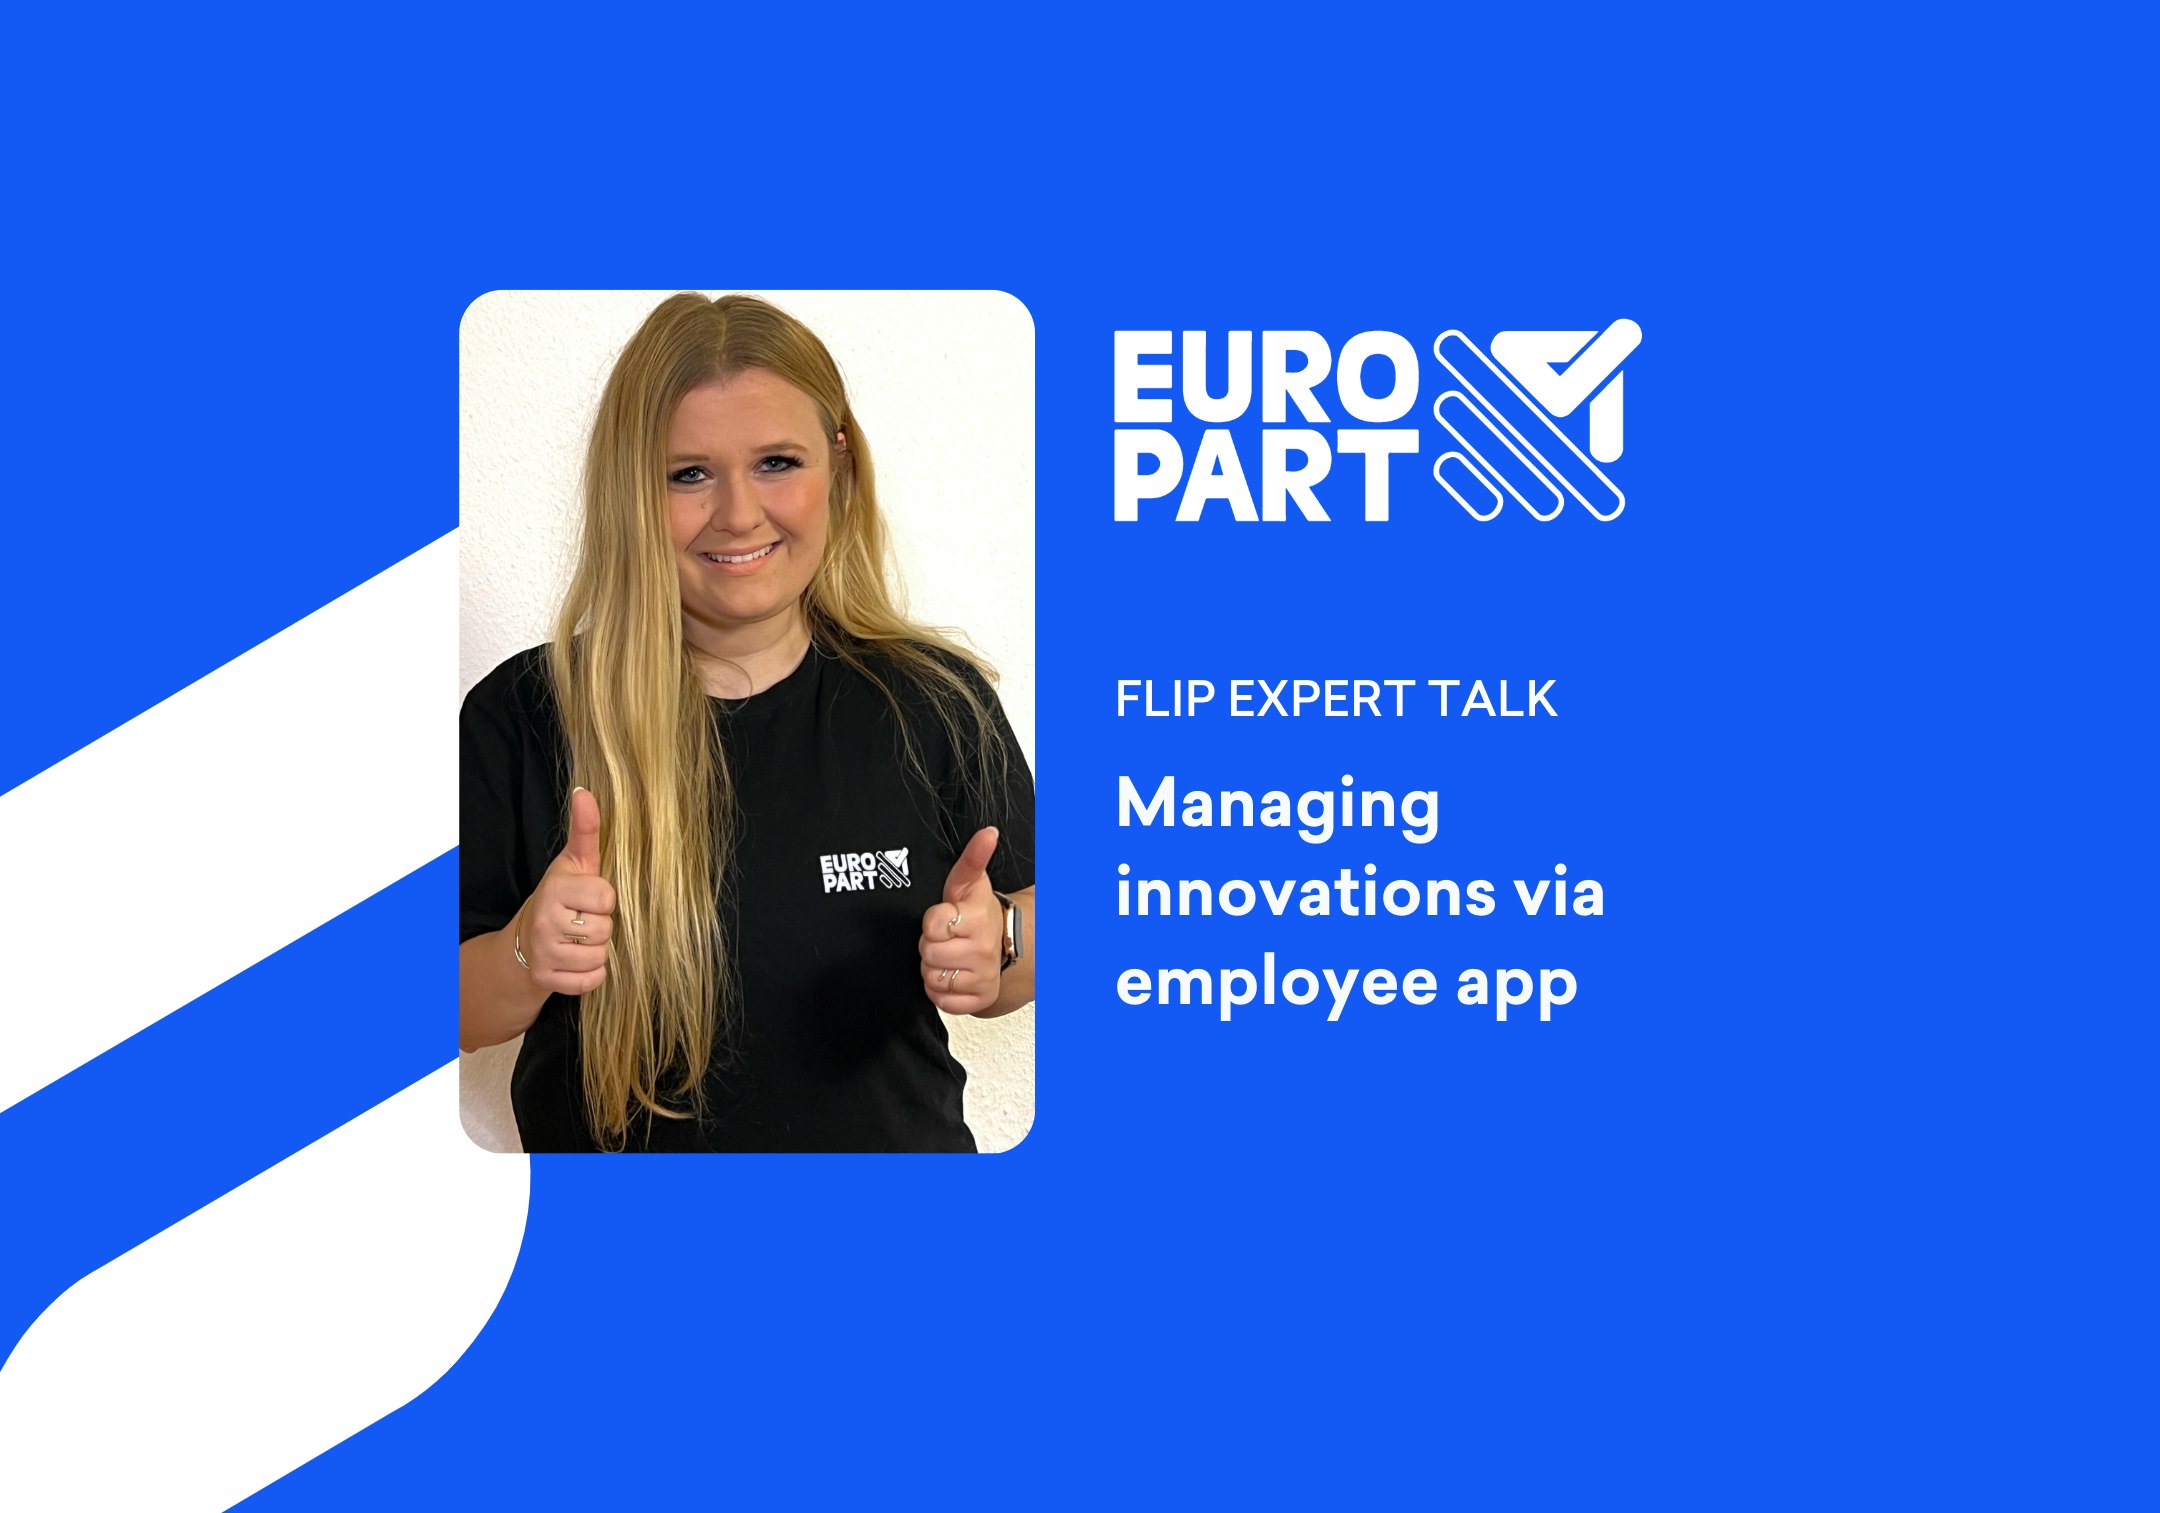 Kira Kebekus from EUROPART gives both thumbs up. Next to it is the title of the expert talk. 